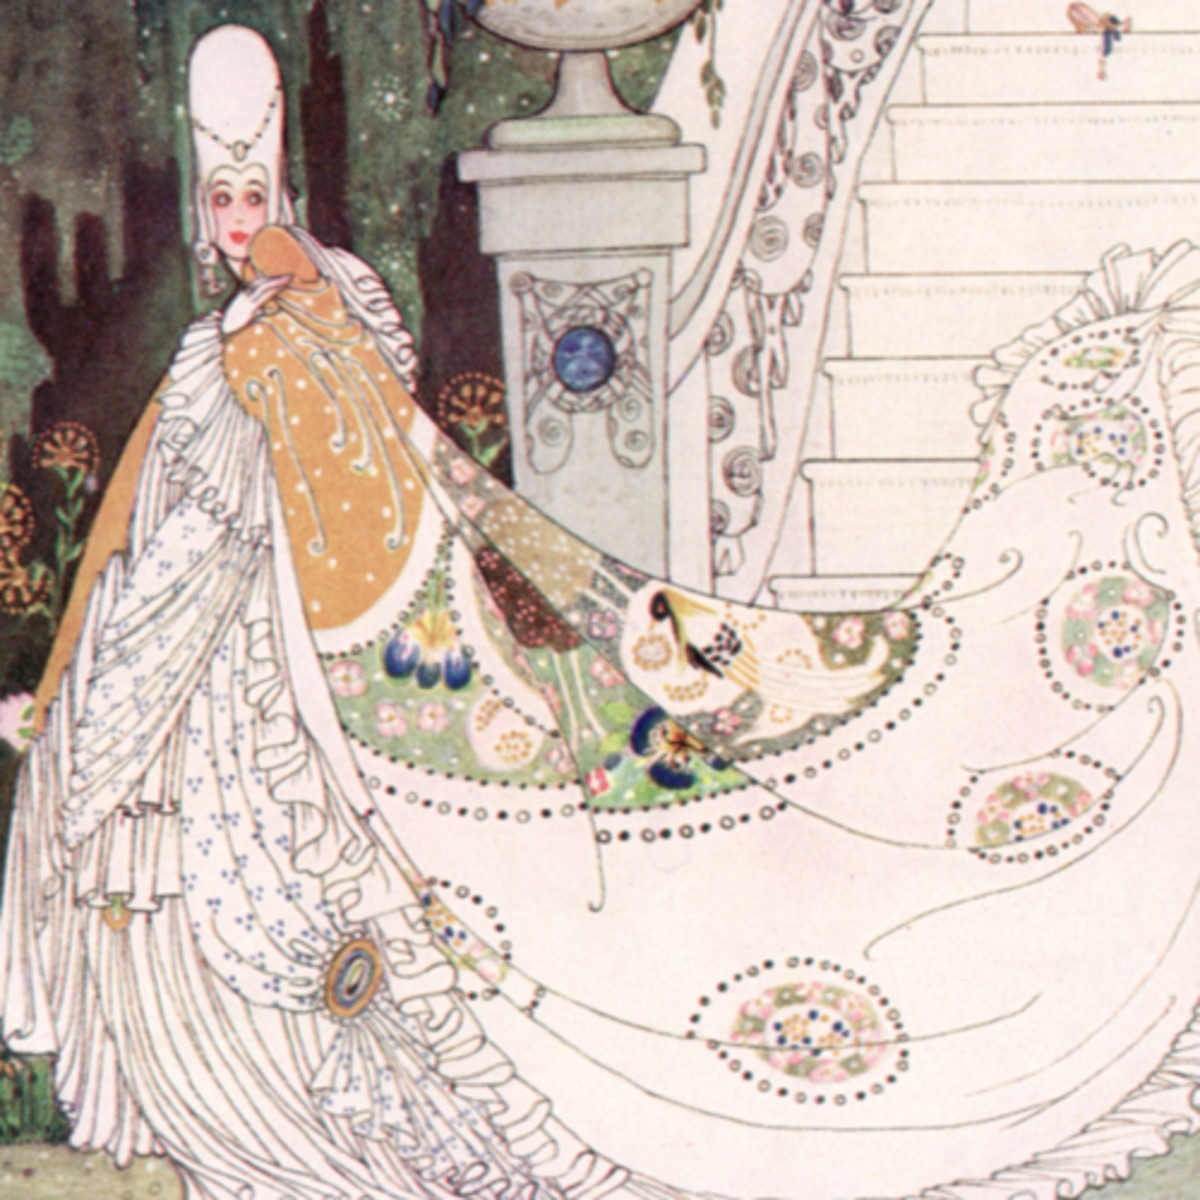 Here we show a portion of "Cinderella" - a design by Kay Nielsen from a suite inspired by the Fairy Tales of Charles Perrault.